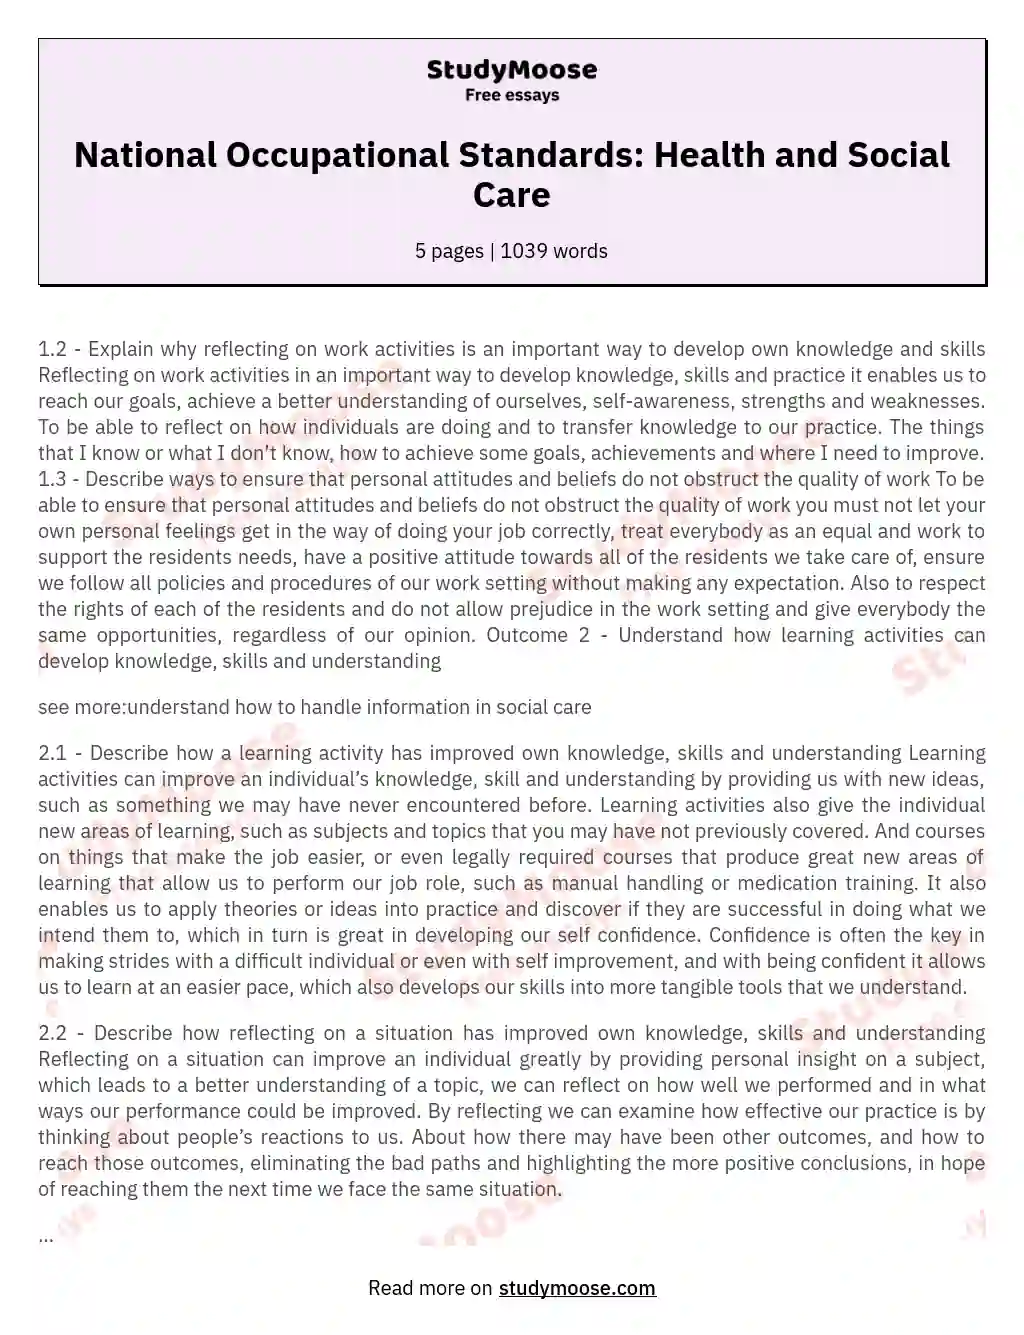 National Occupational Standards: Health and Social Care essay